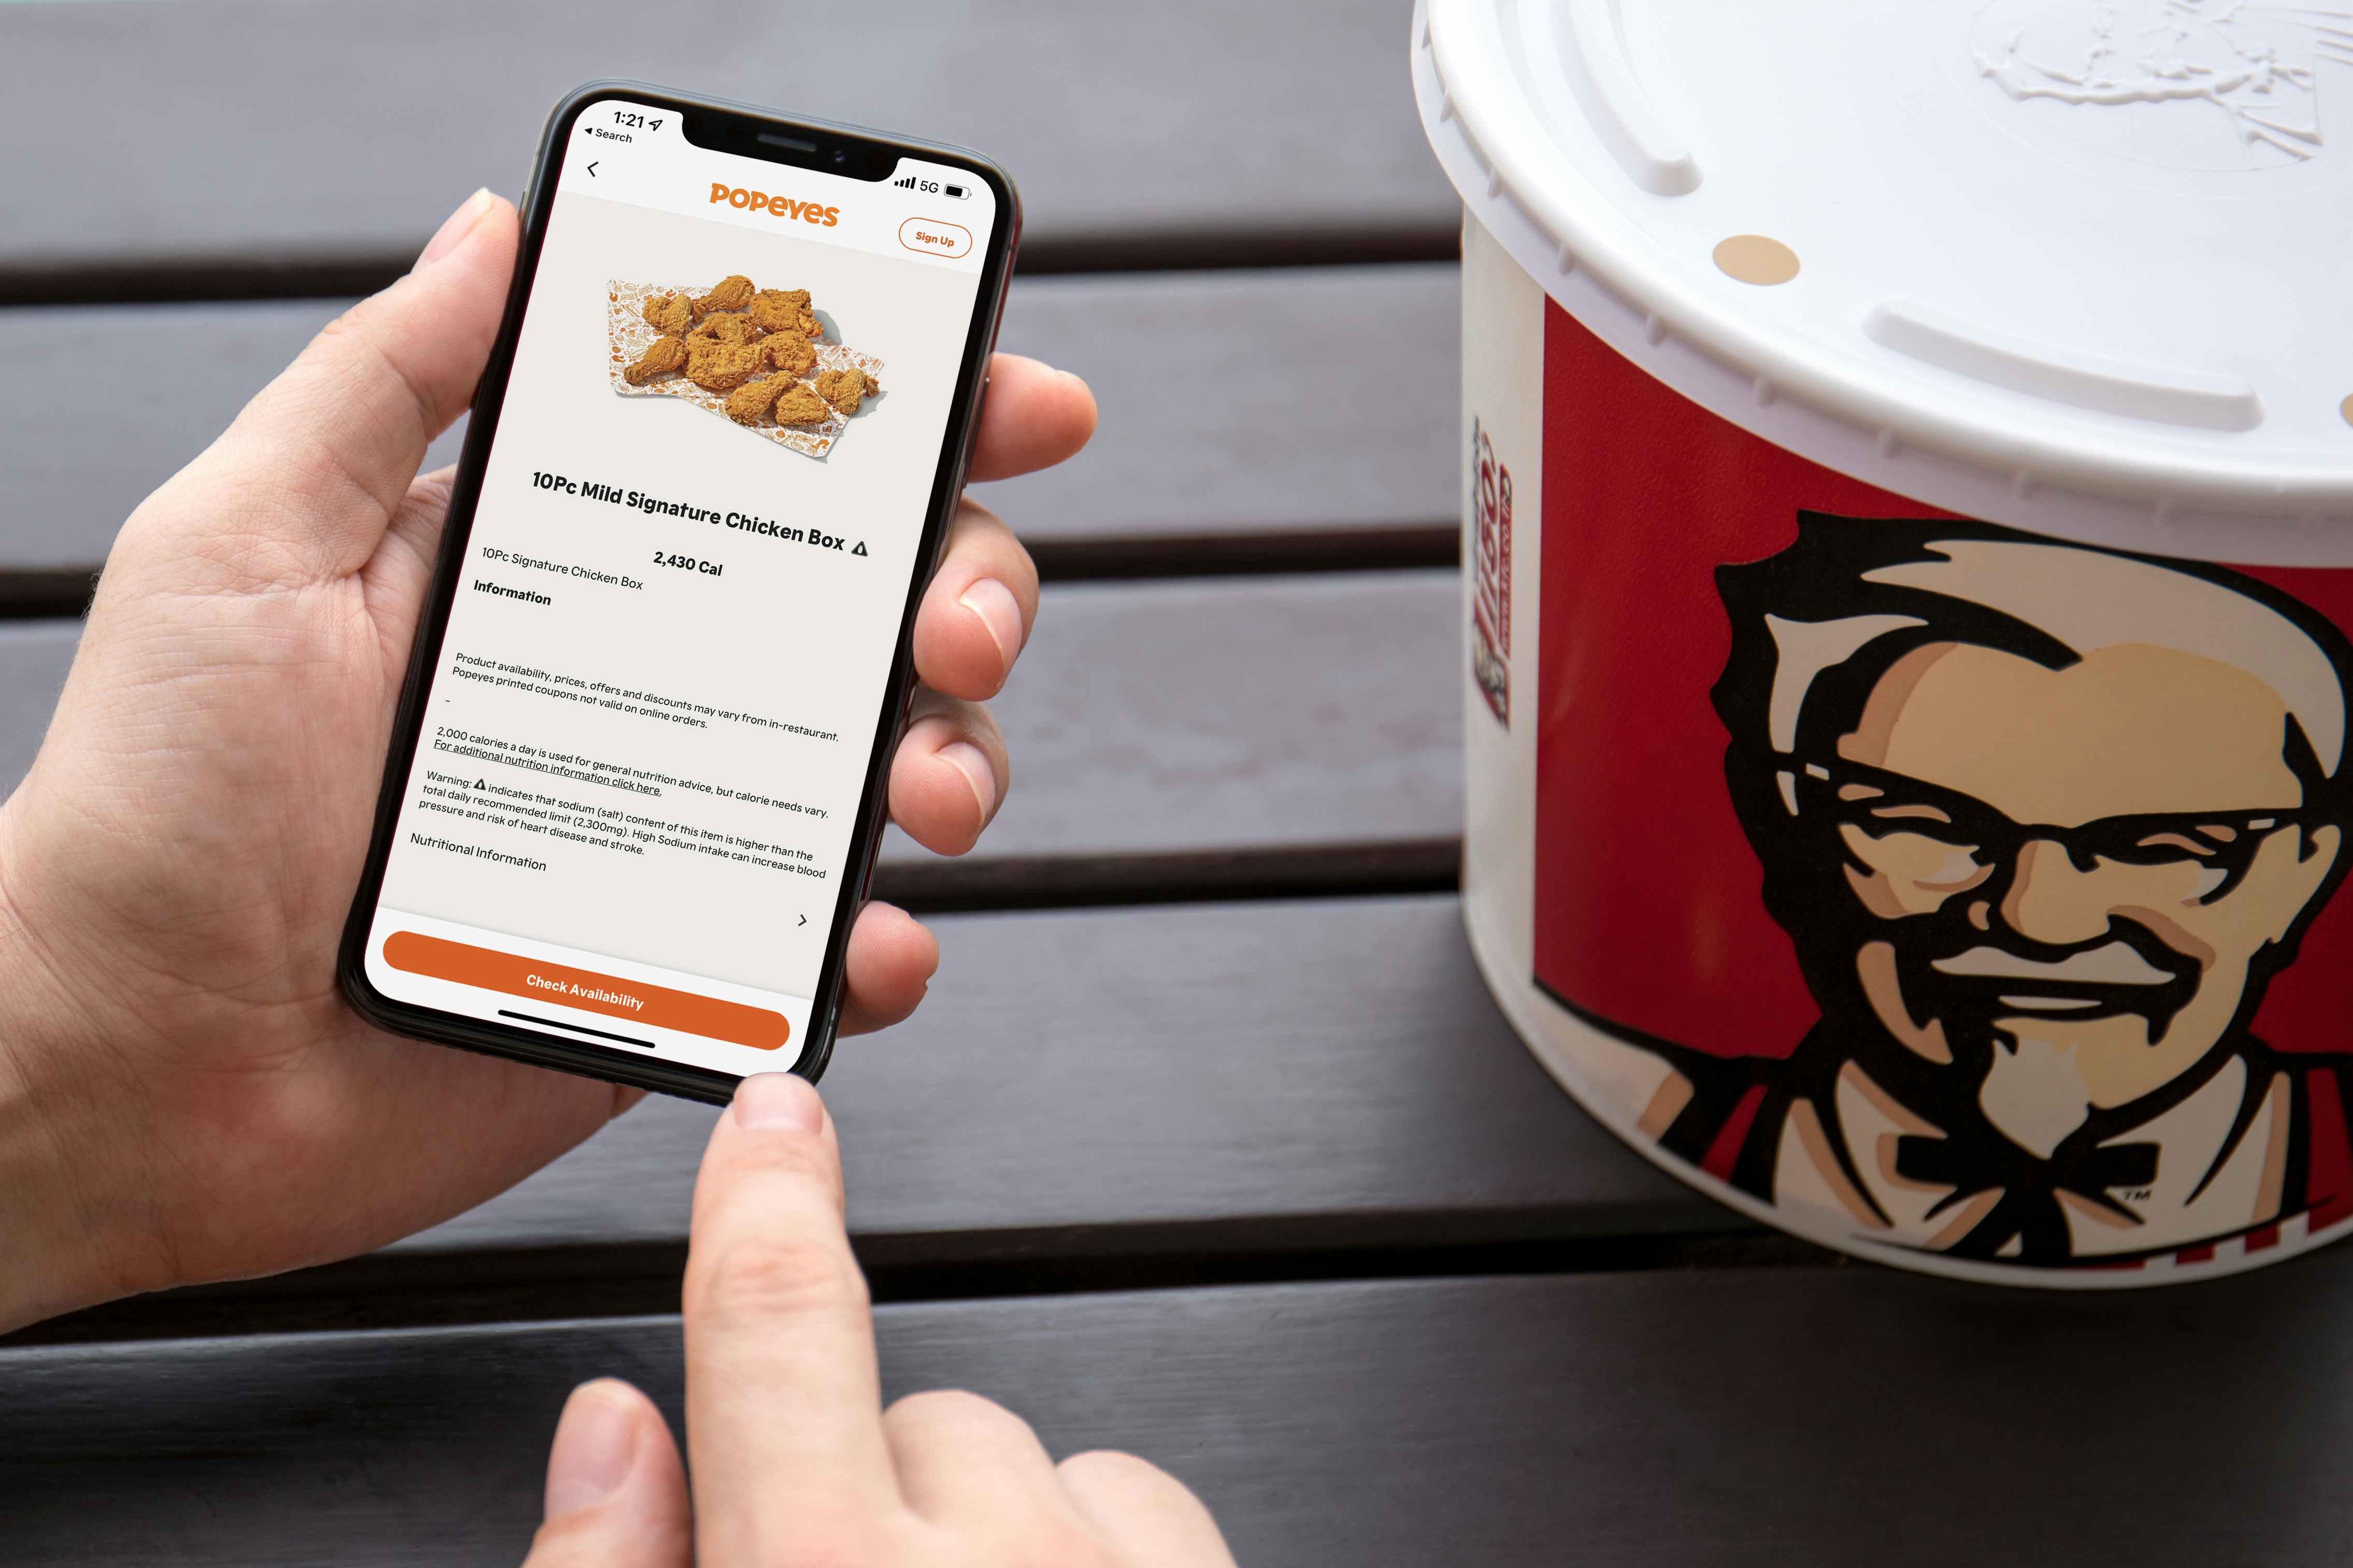 A person's hand holding an iPhone displaying the Popeyes app next to a KFC chicken bucket.